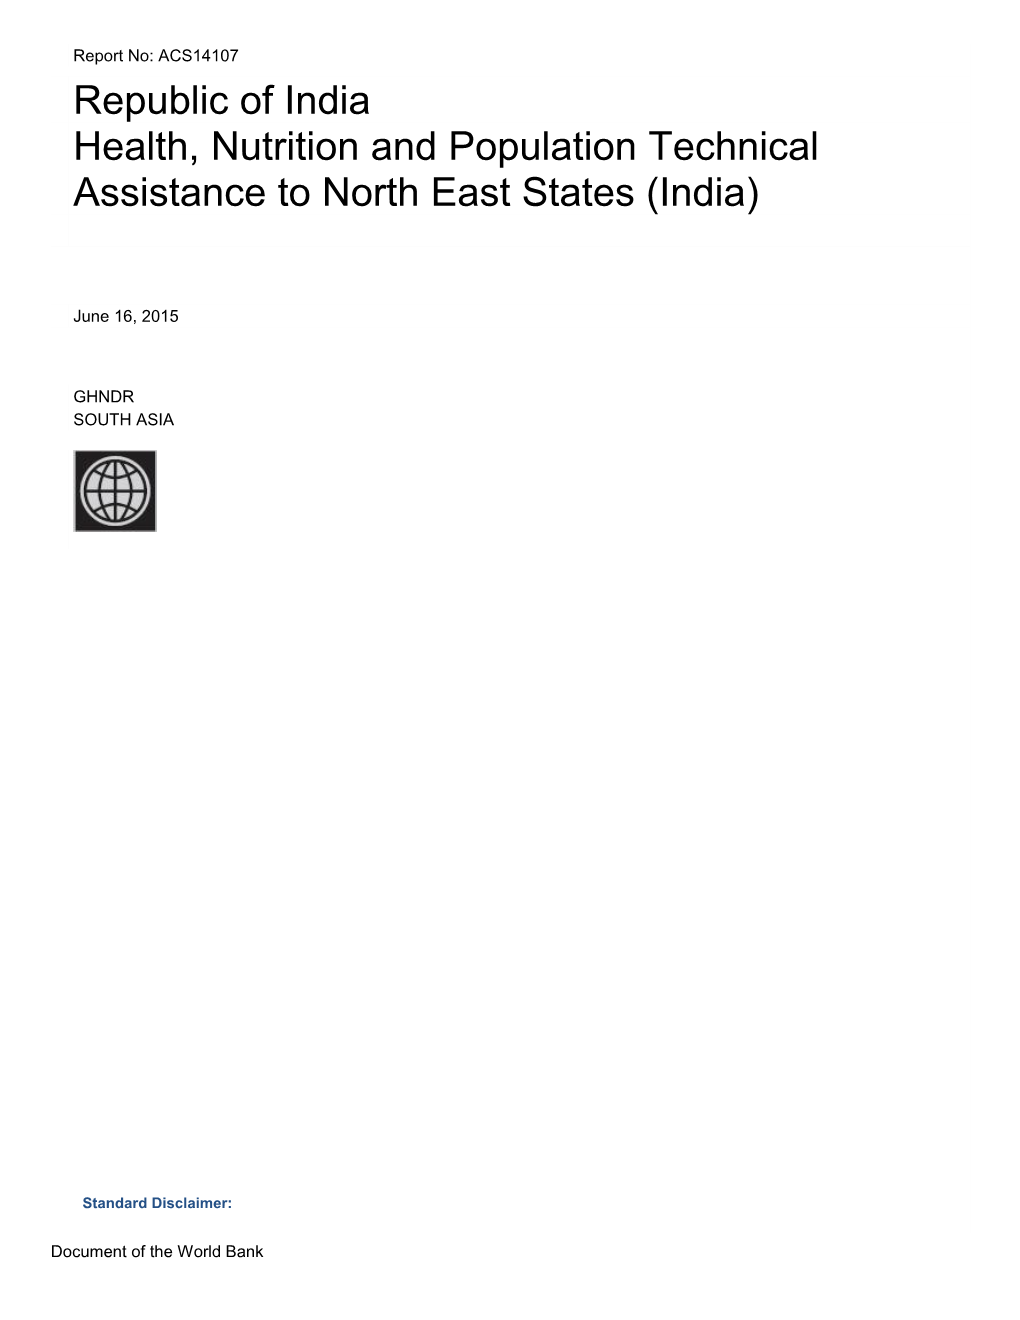 Health, Nutrition and Population Technical Assistance to North East States